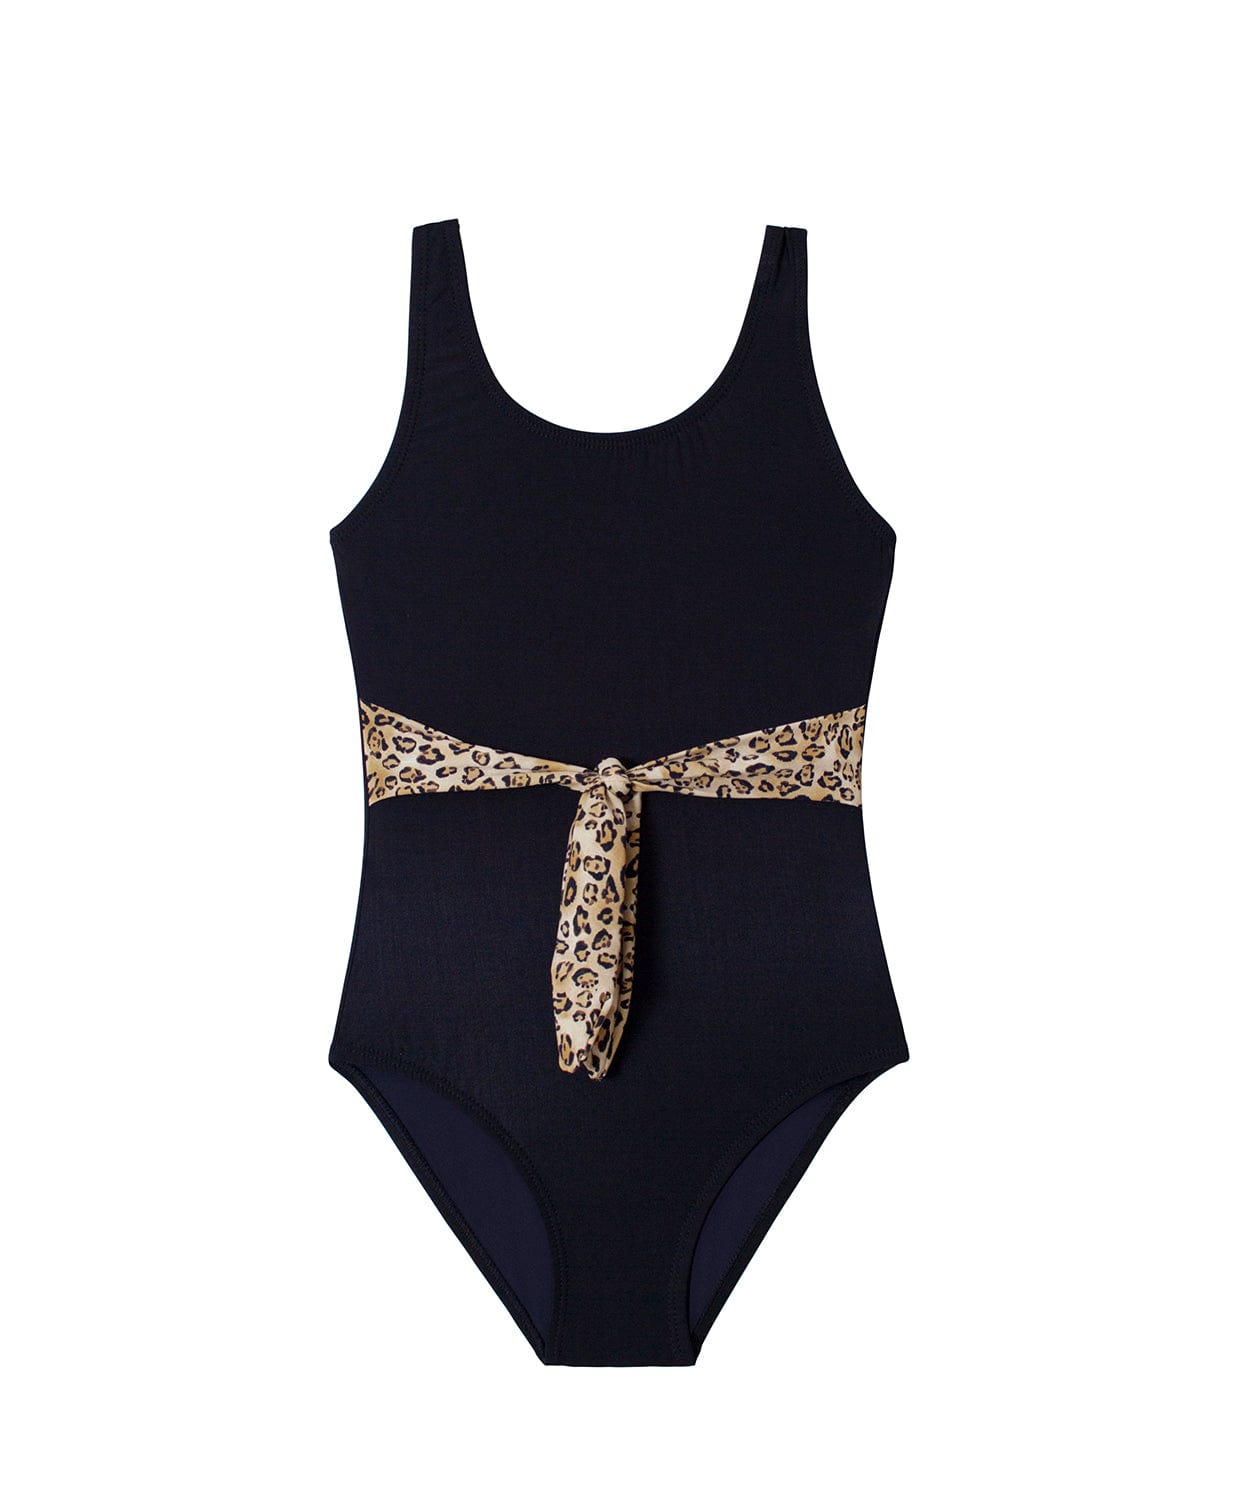 PQ Swim girls belted bow one piece swimsuit